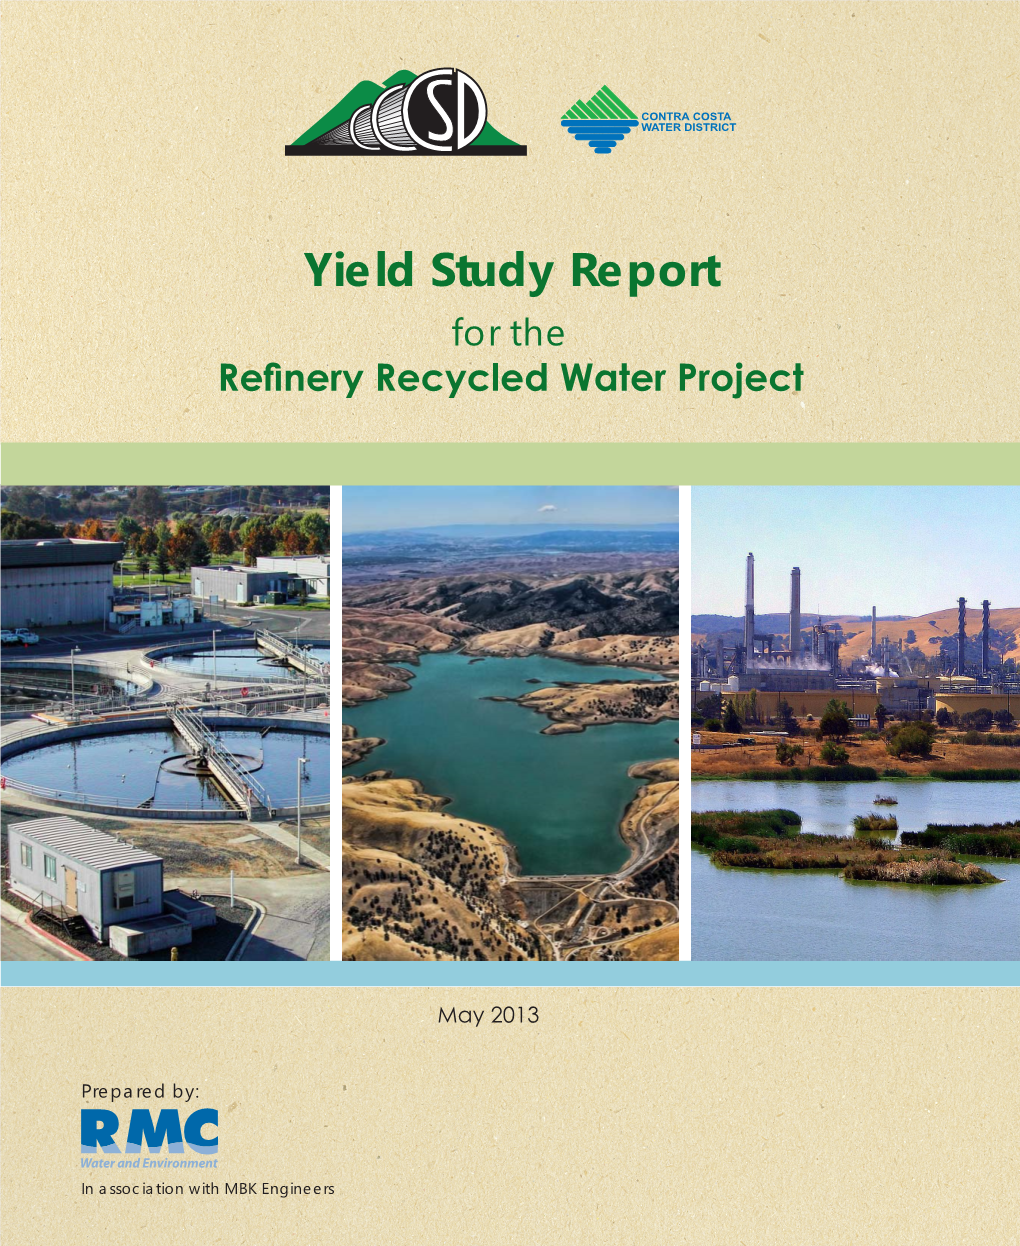 Yield Study Report for the Refinery Recycled Water Project